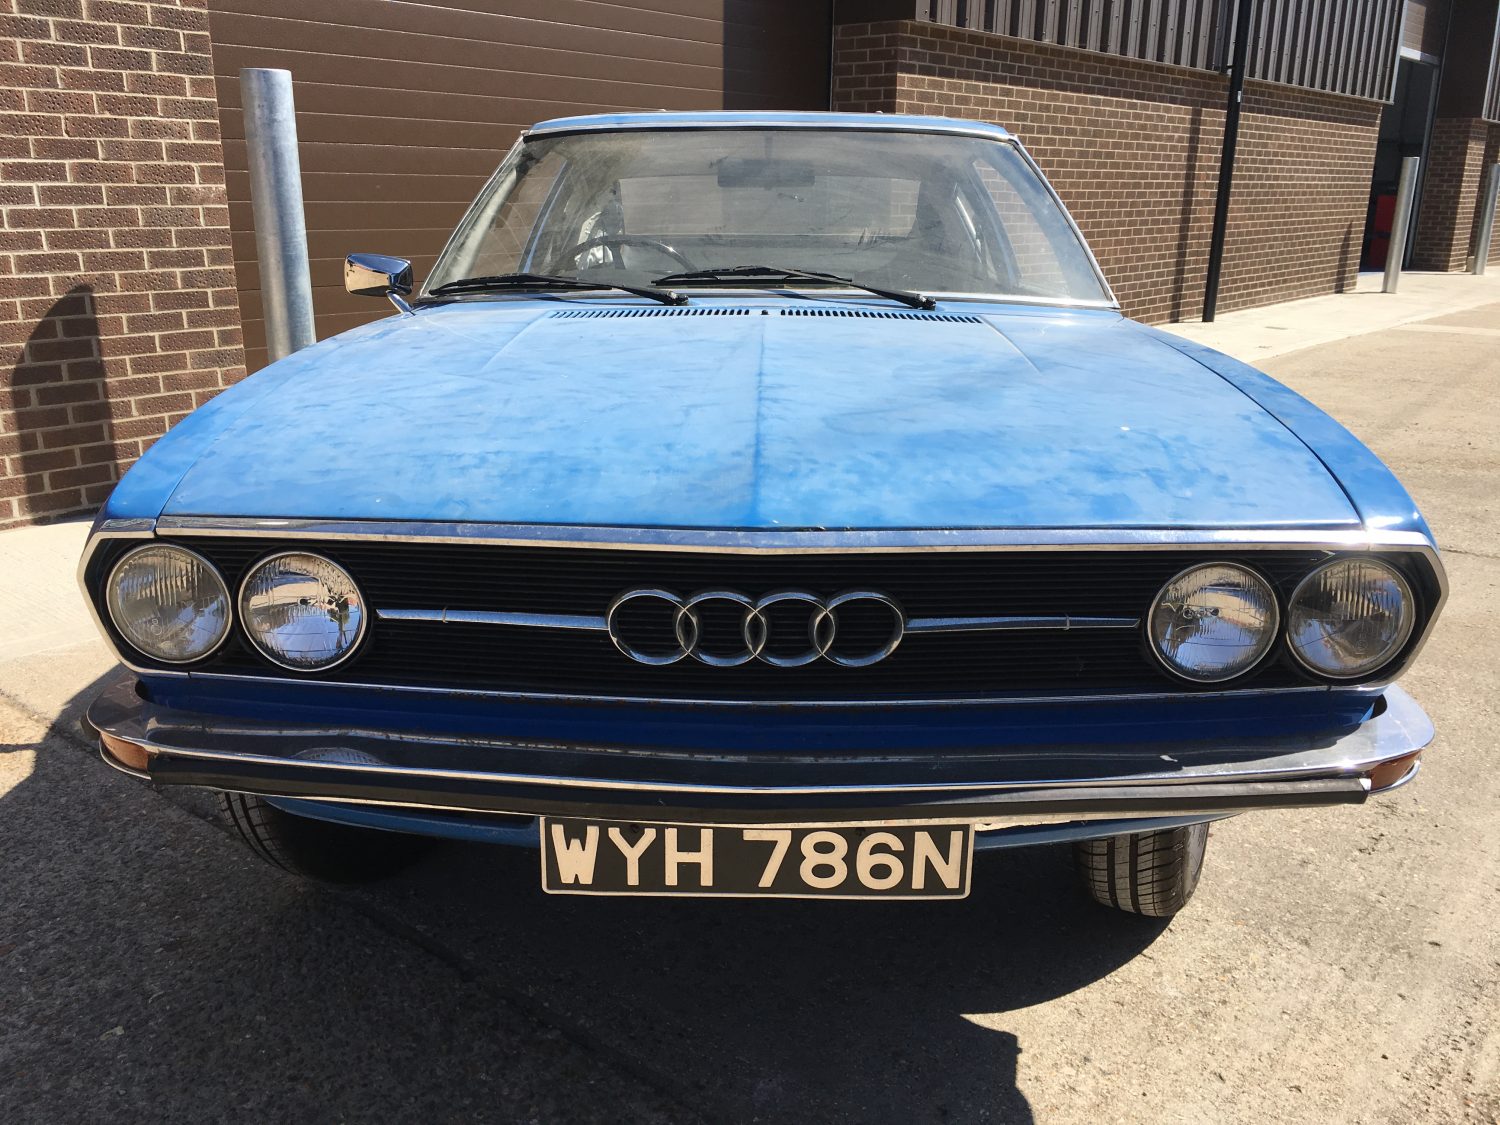 1974 Audi 100 Coupe S in our workshops - Bridge Classic ...